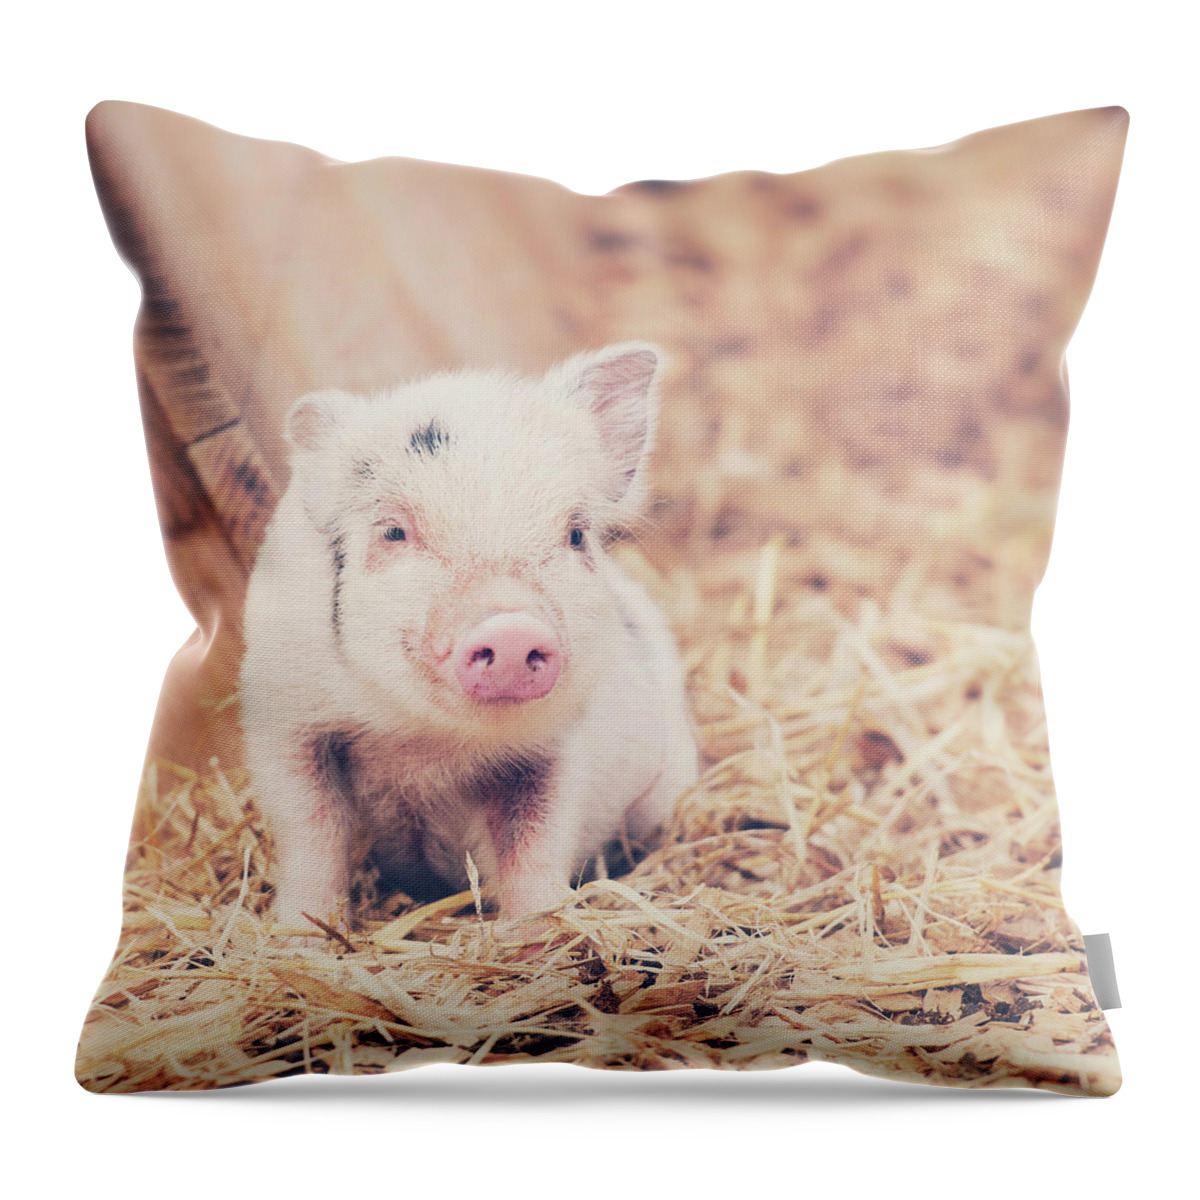 Pig Throw Pillow featuring the photograph Micro Pig by Samantha Nicol Art Photography